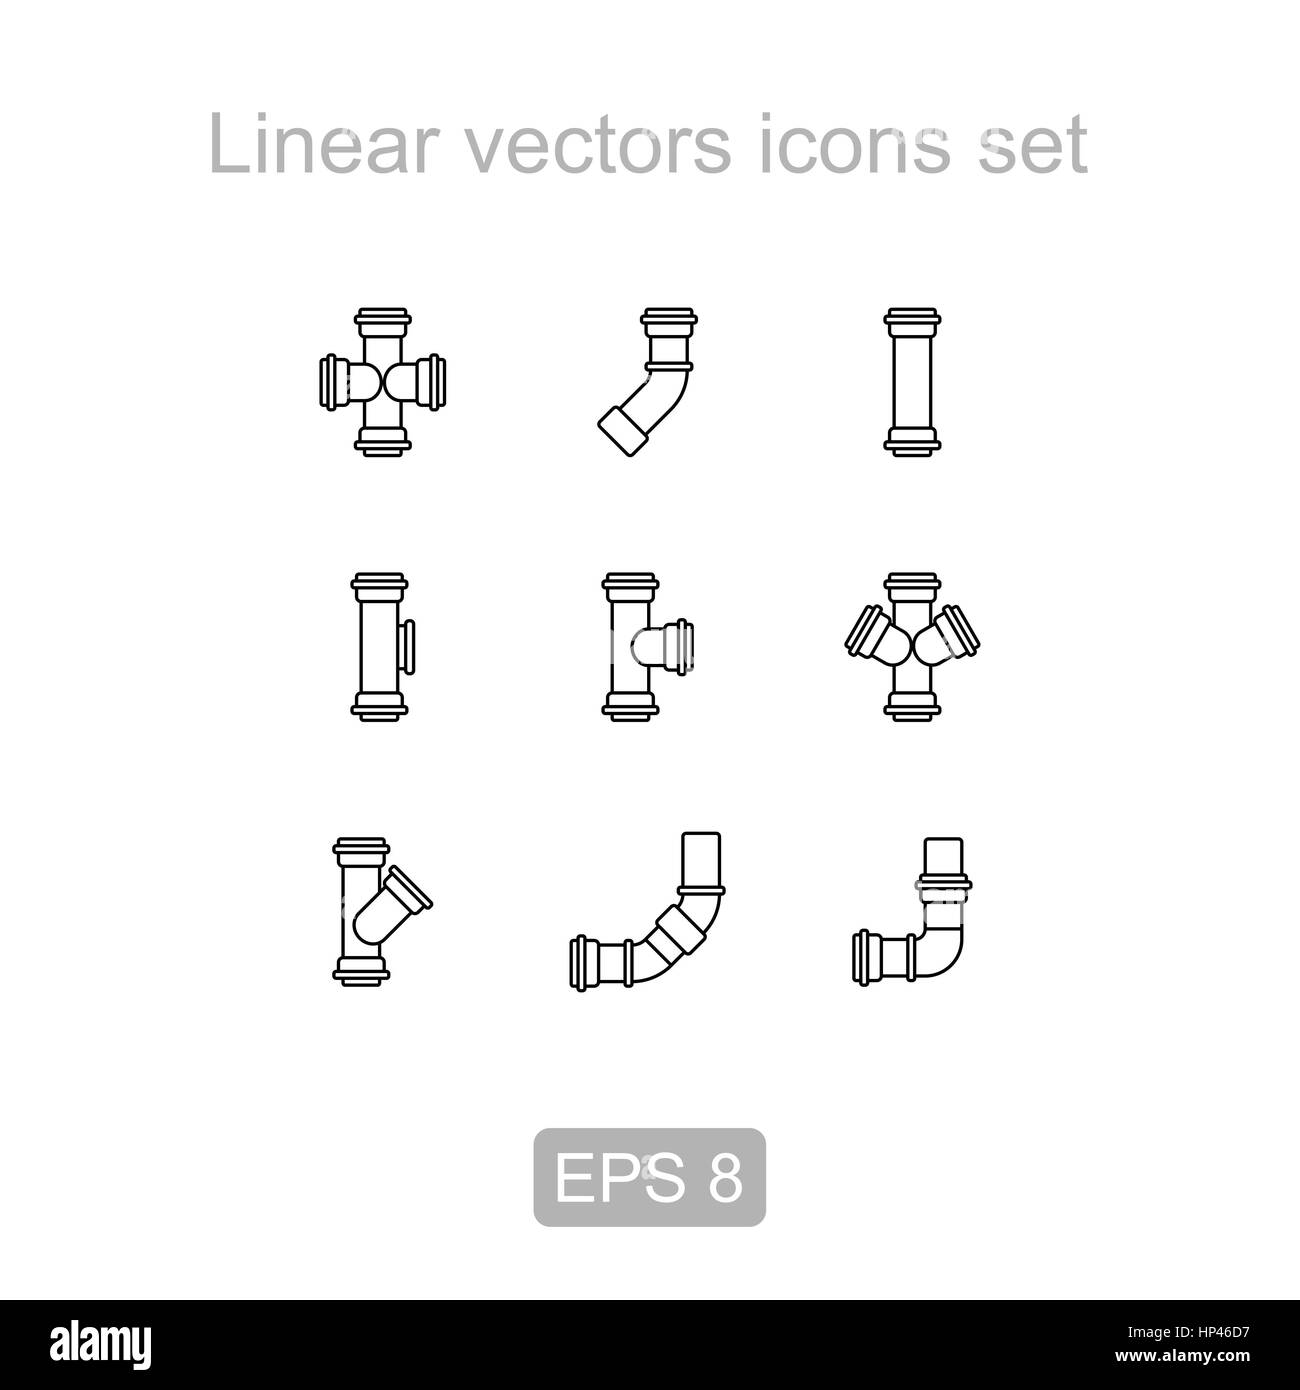 Icon of the pipes, fittings icon set in a linear style Stock Photo